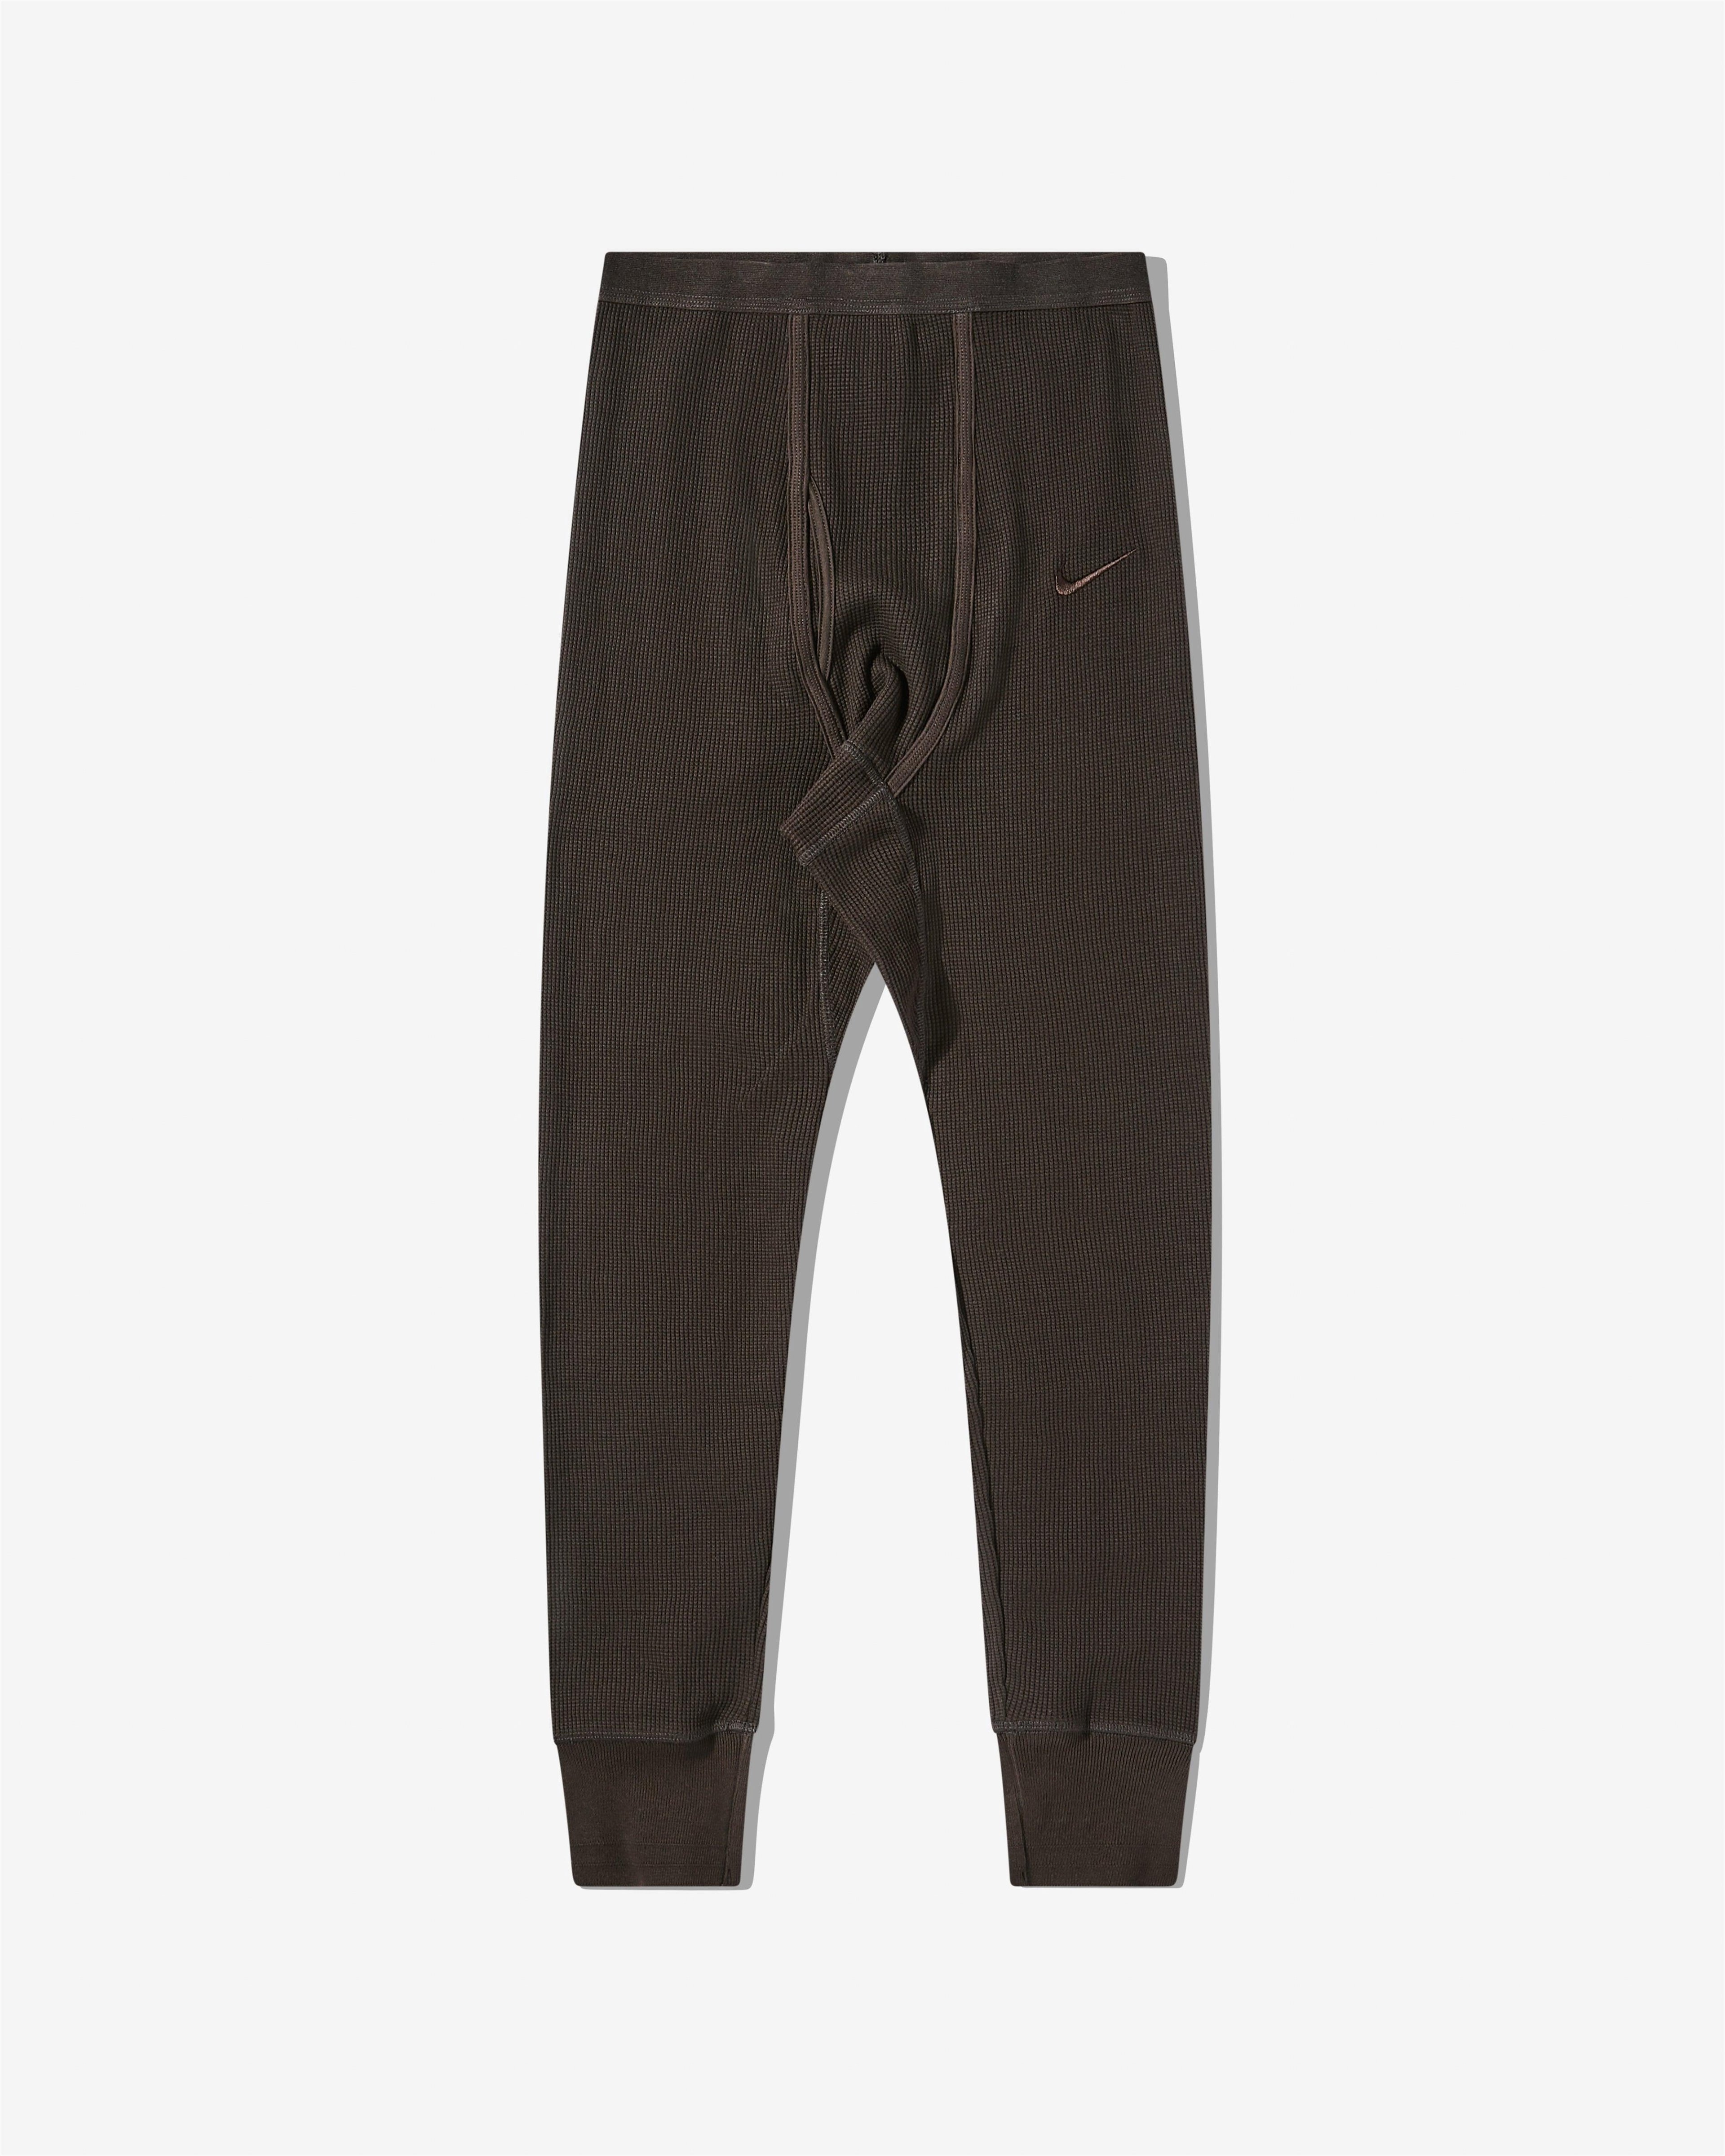 Nike - Men's Bode Thermal Pant - (FQ4567-235) by NIKE